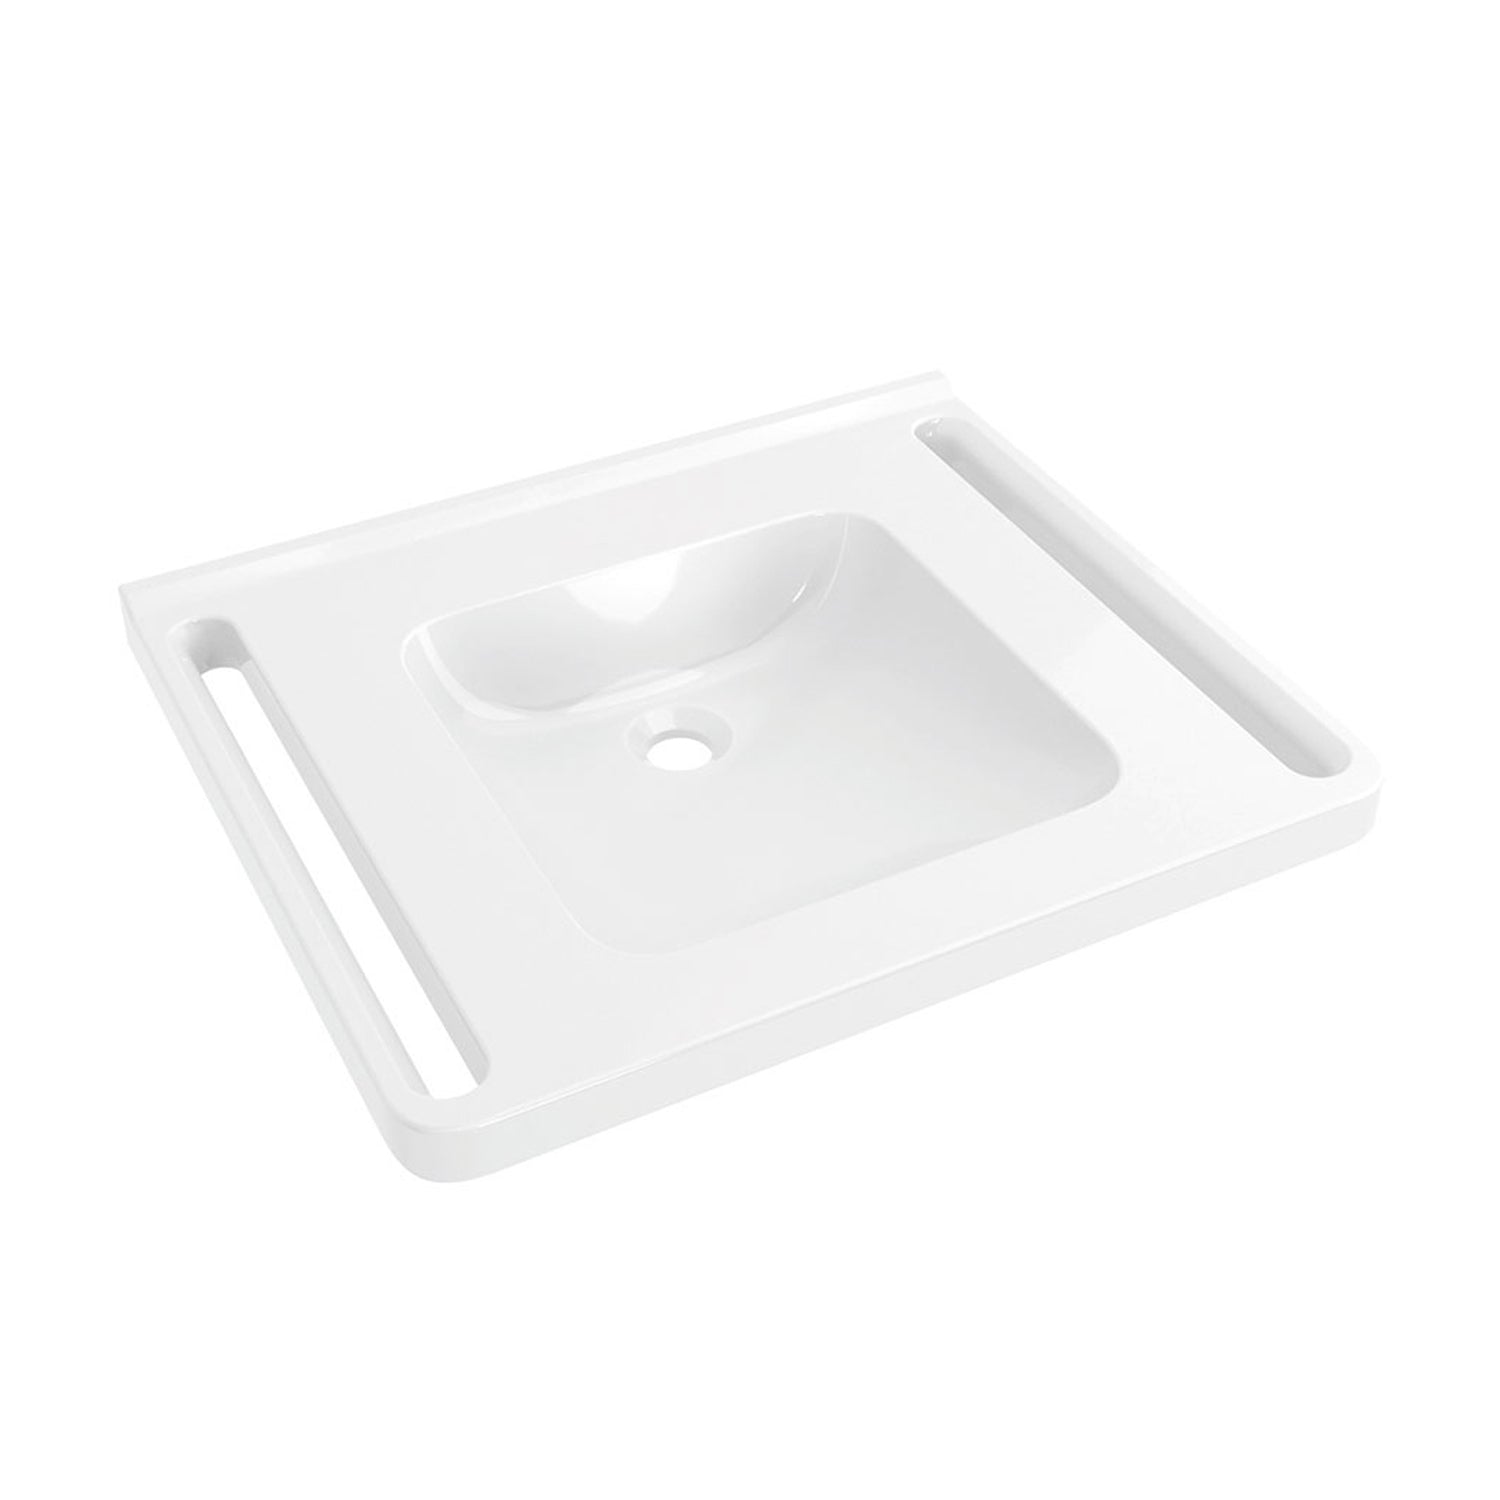 650mm SurfaceHold Wall Hung Square Basin with no tap hole on a white background